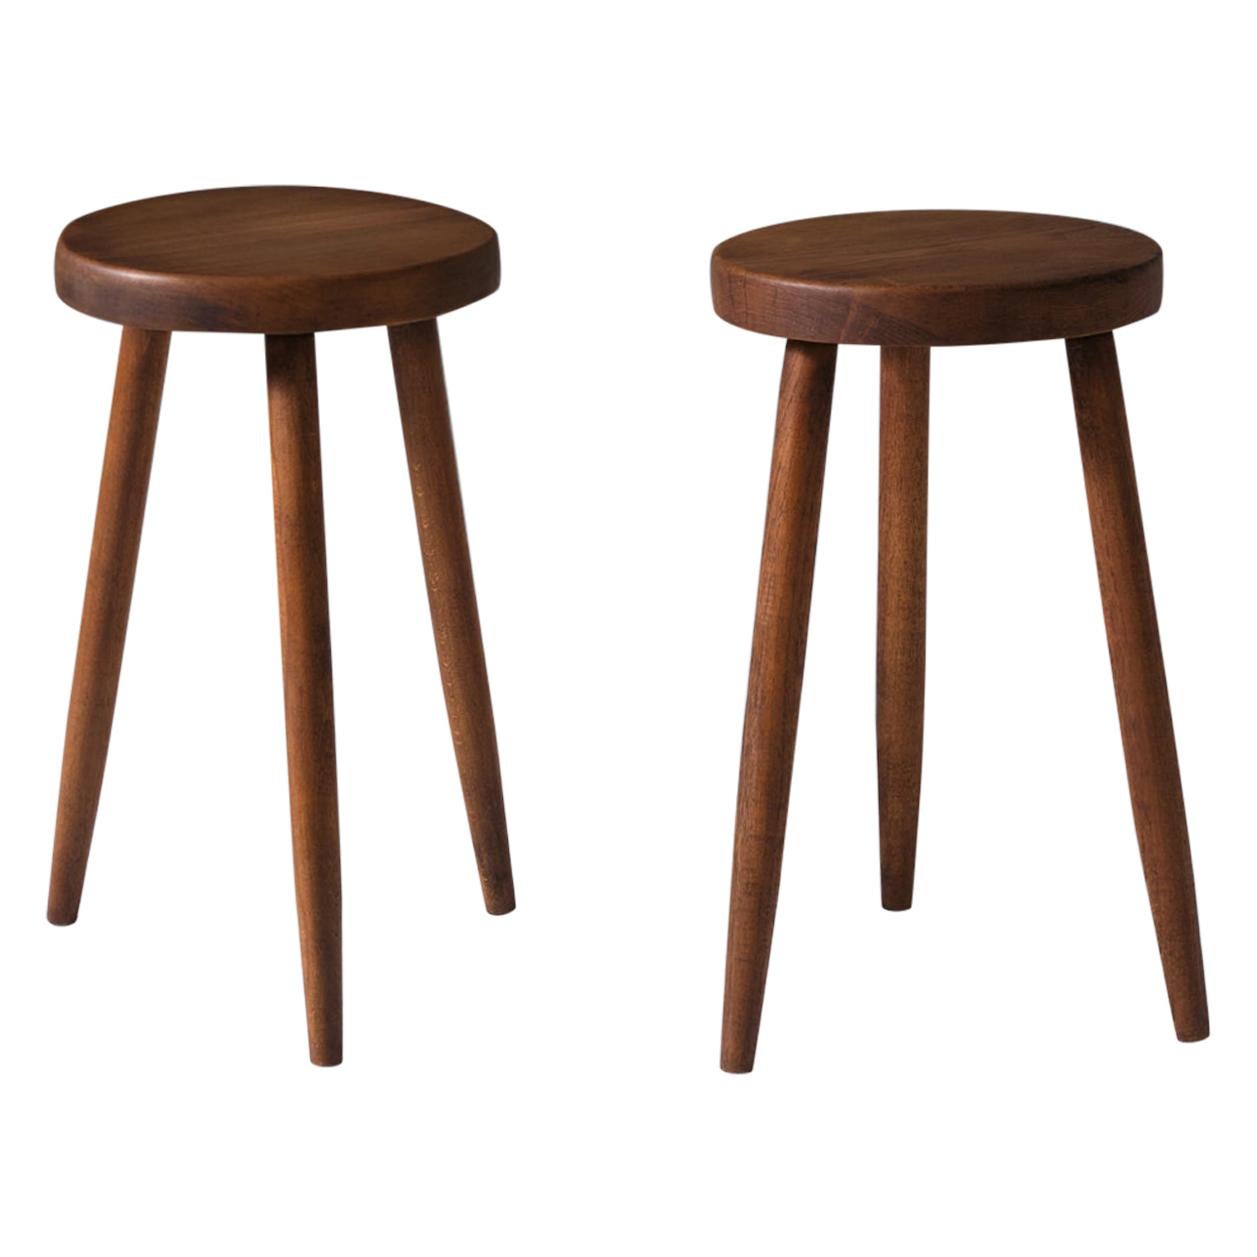 Pair of Oak Stools with High Tapered Legs